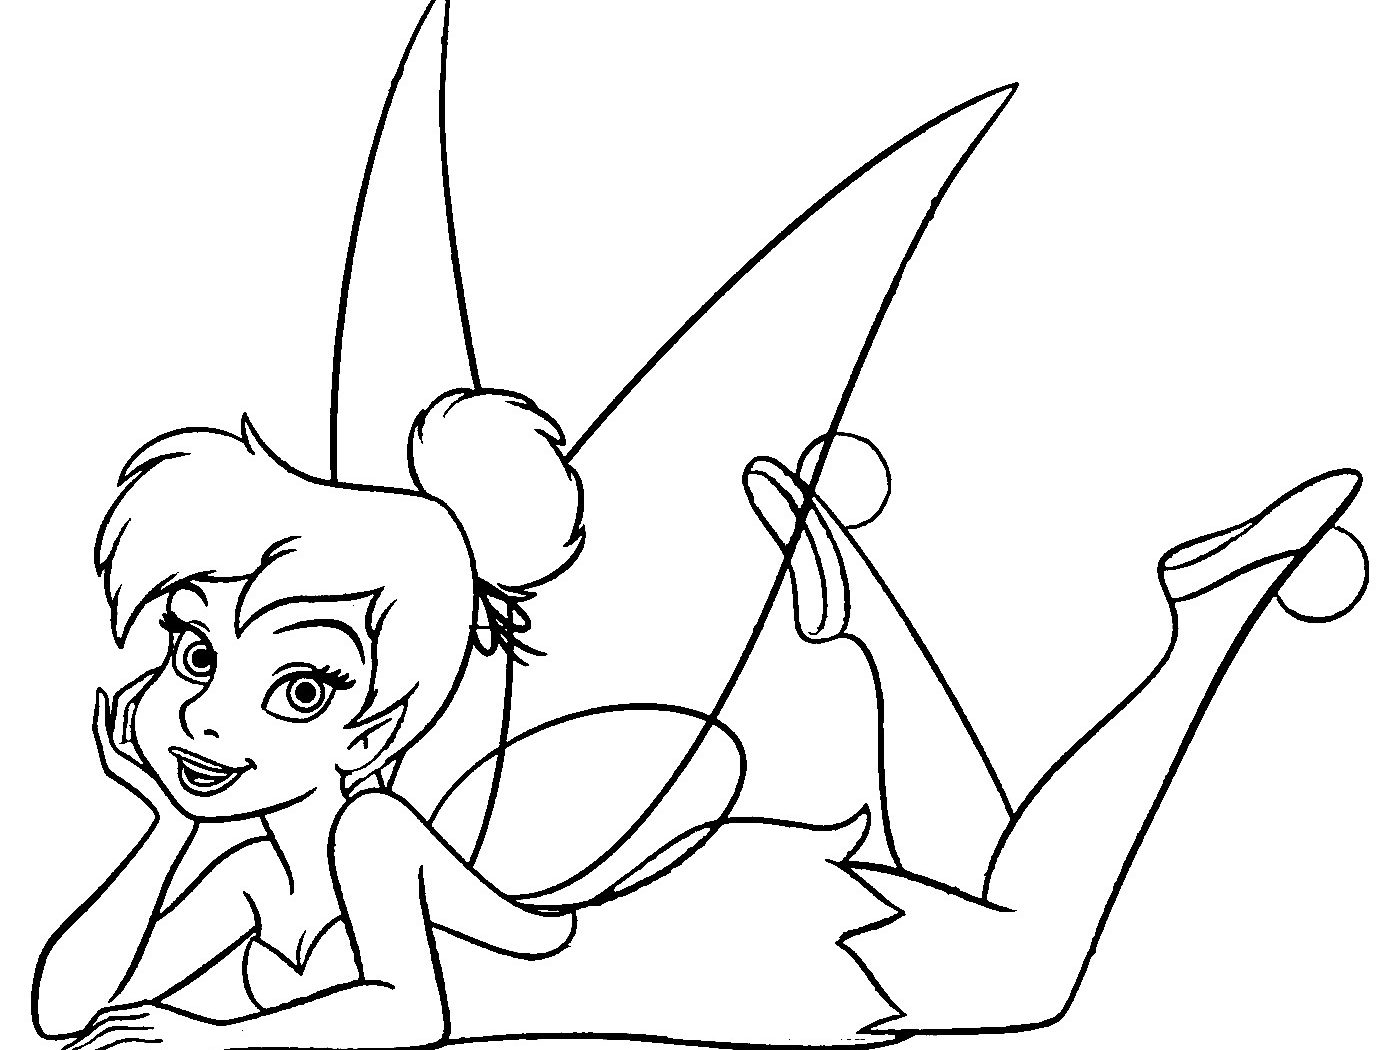 Tinkerbell Colouring Pages Games Online Coloring Free Color Pirate - Tinkerbell Coloring Pages Printable Free